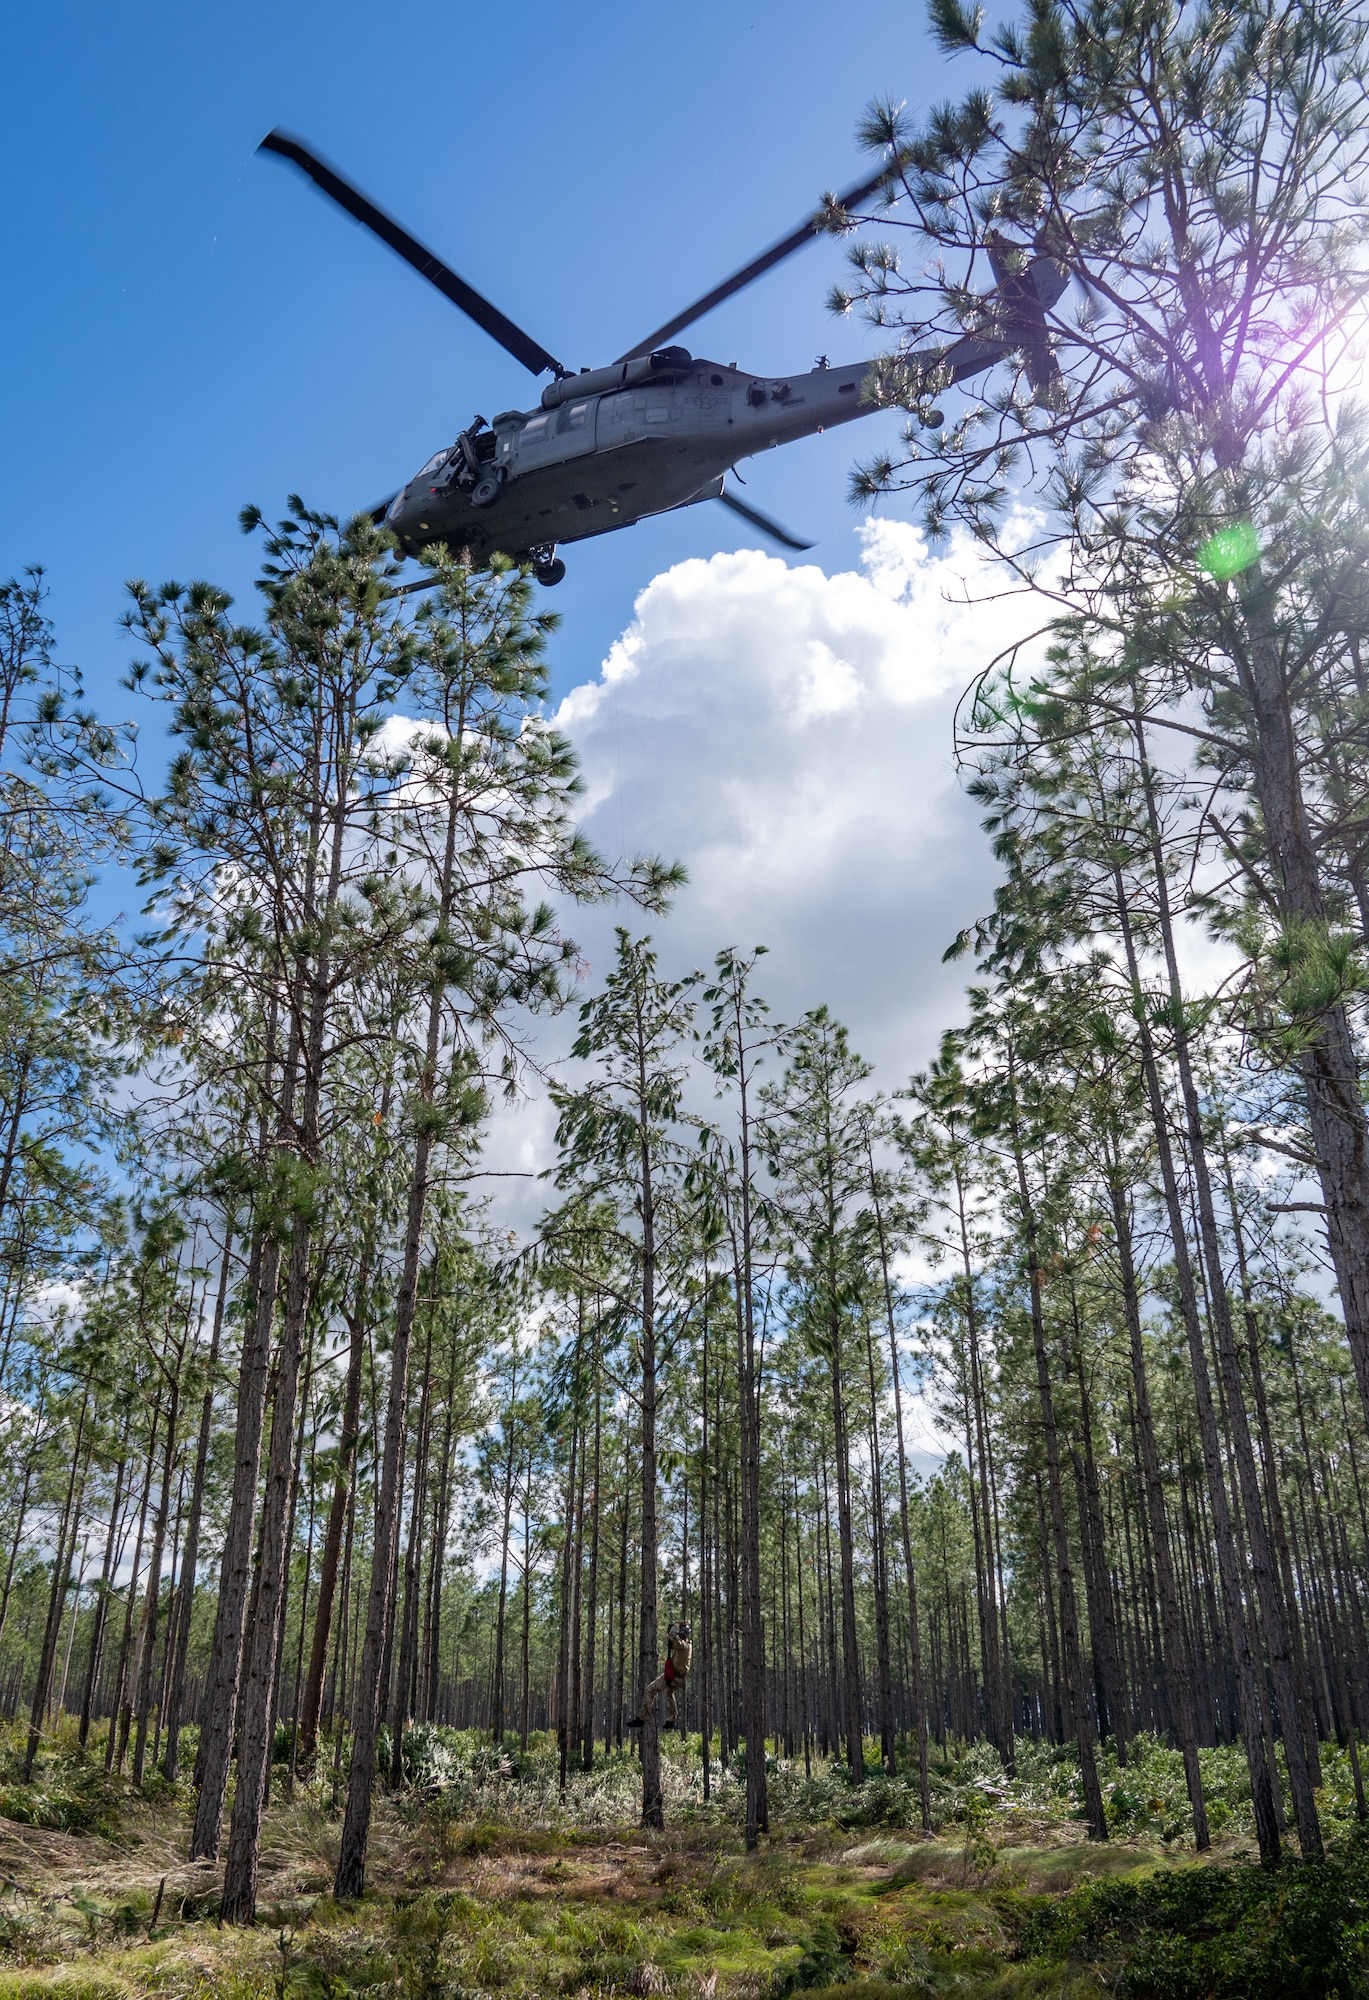 301st Rescue Squadron hosts skills-based rescue competition